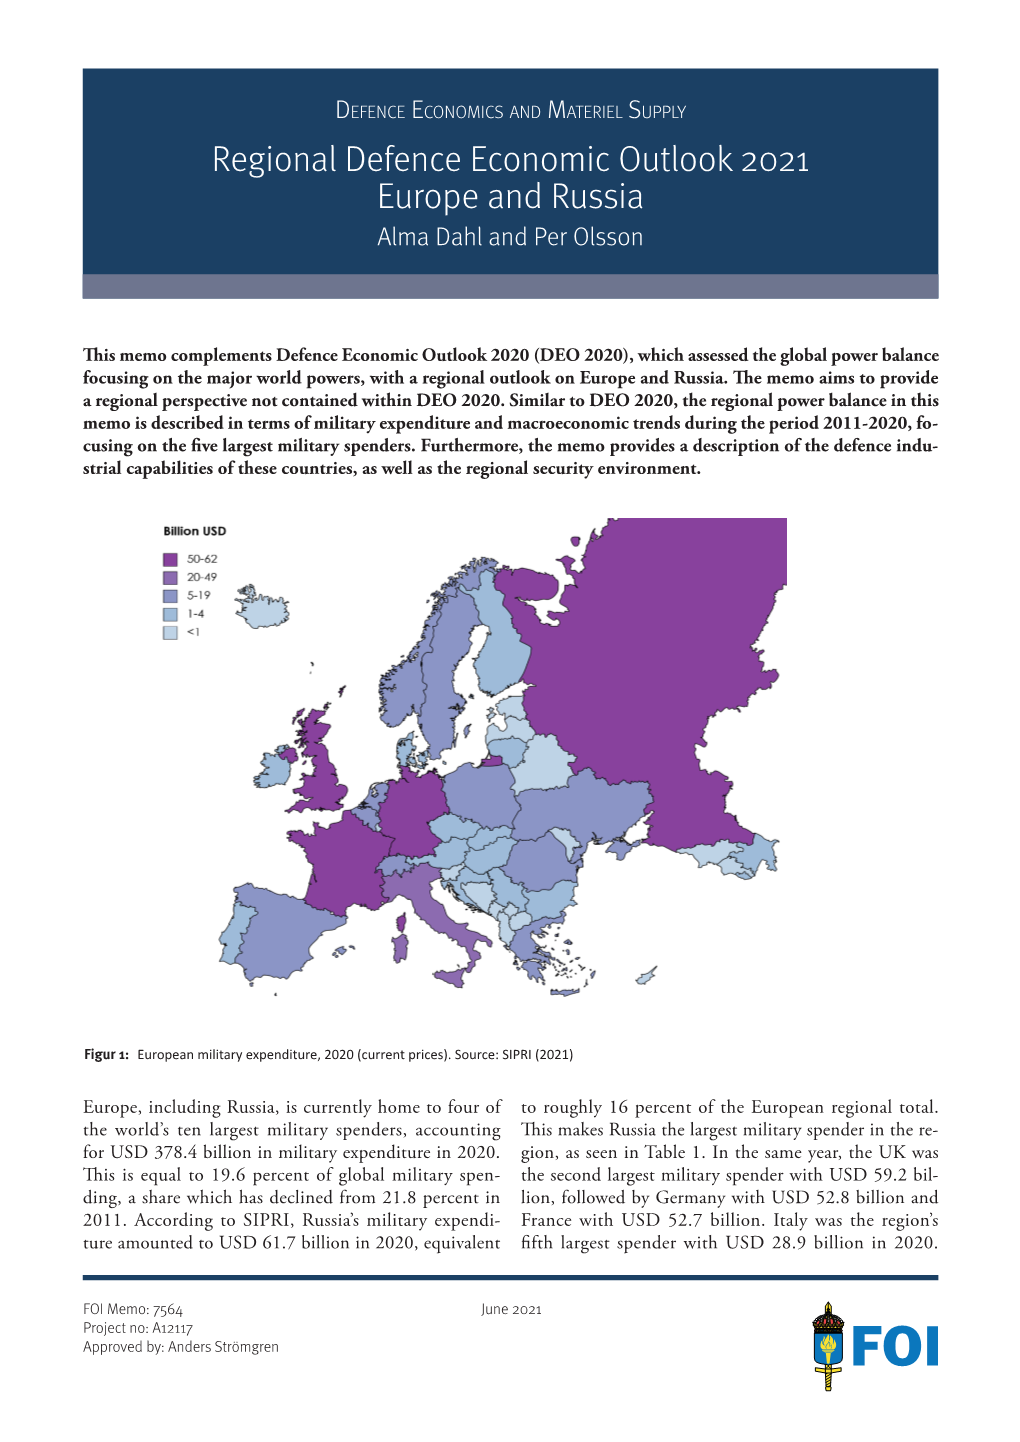 Regional Defence Economic Outlook 2021 Europe and Russia Alma Dahl and Per Olsson